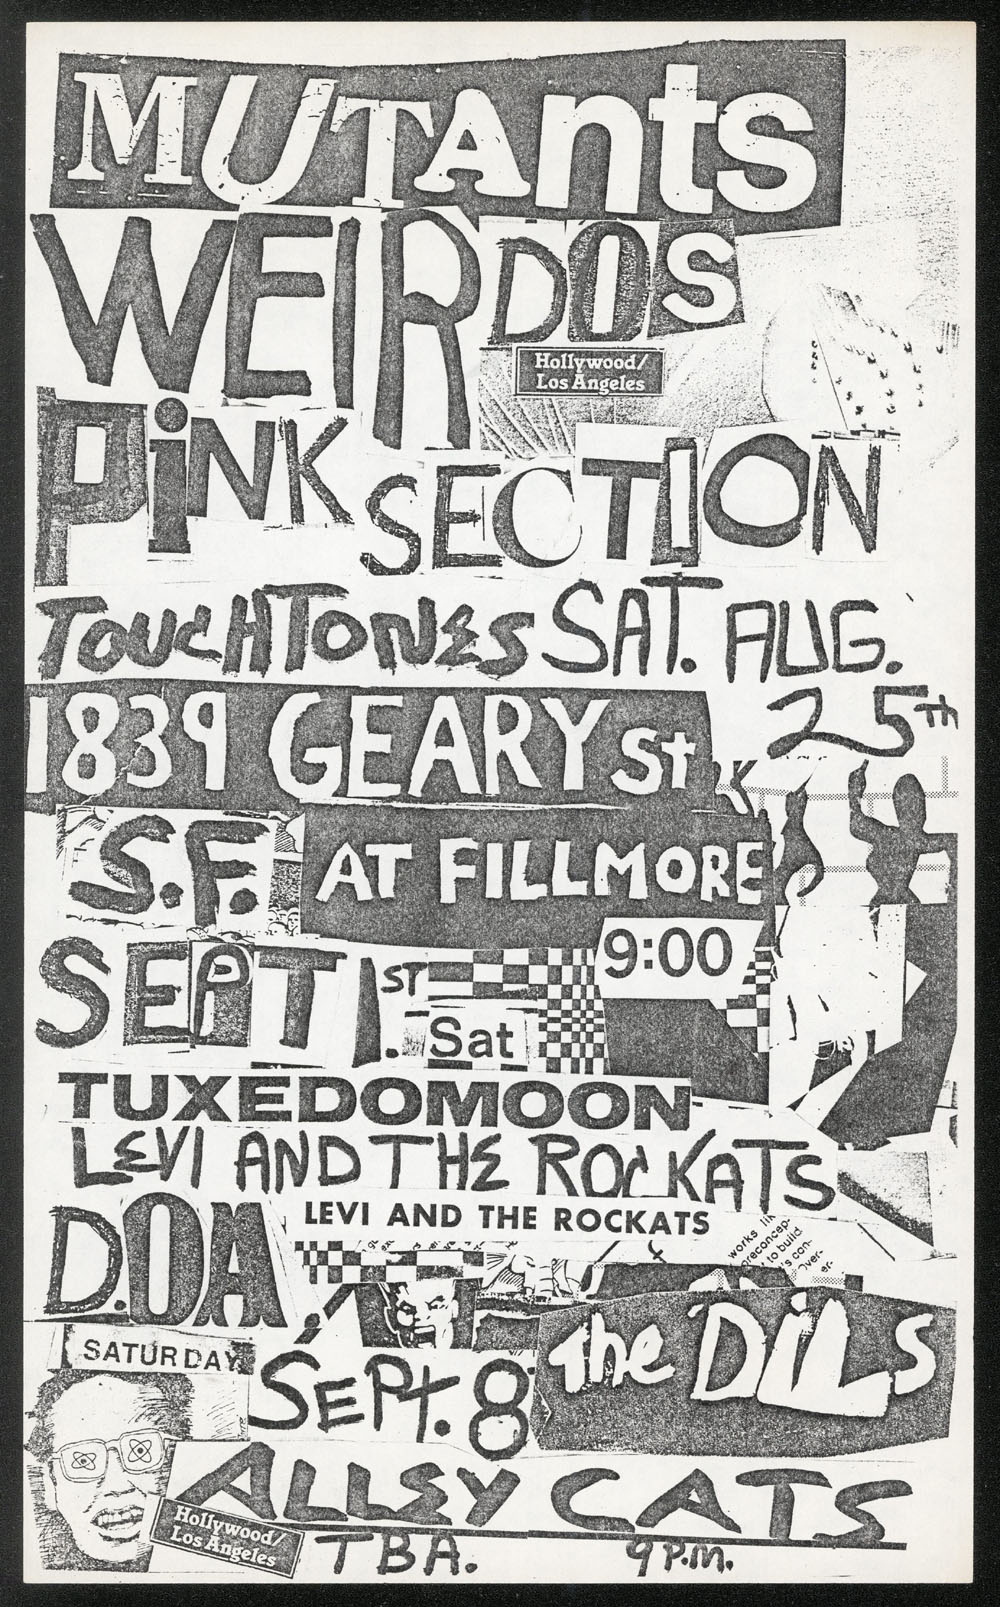 MUTANTS w/ Weirdos, Pink Section + TUXEDOMOON w/ Levi & The Rockats + DOA w/ Dils, Alley Cats at 1839 Geary